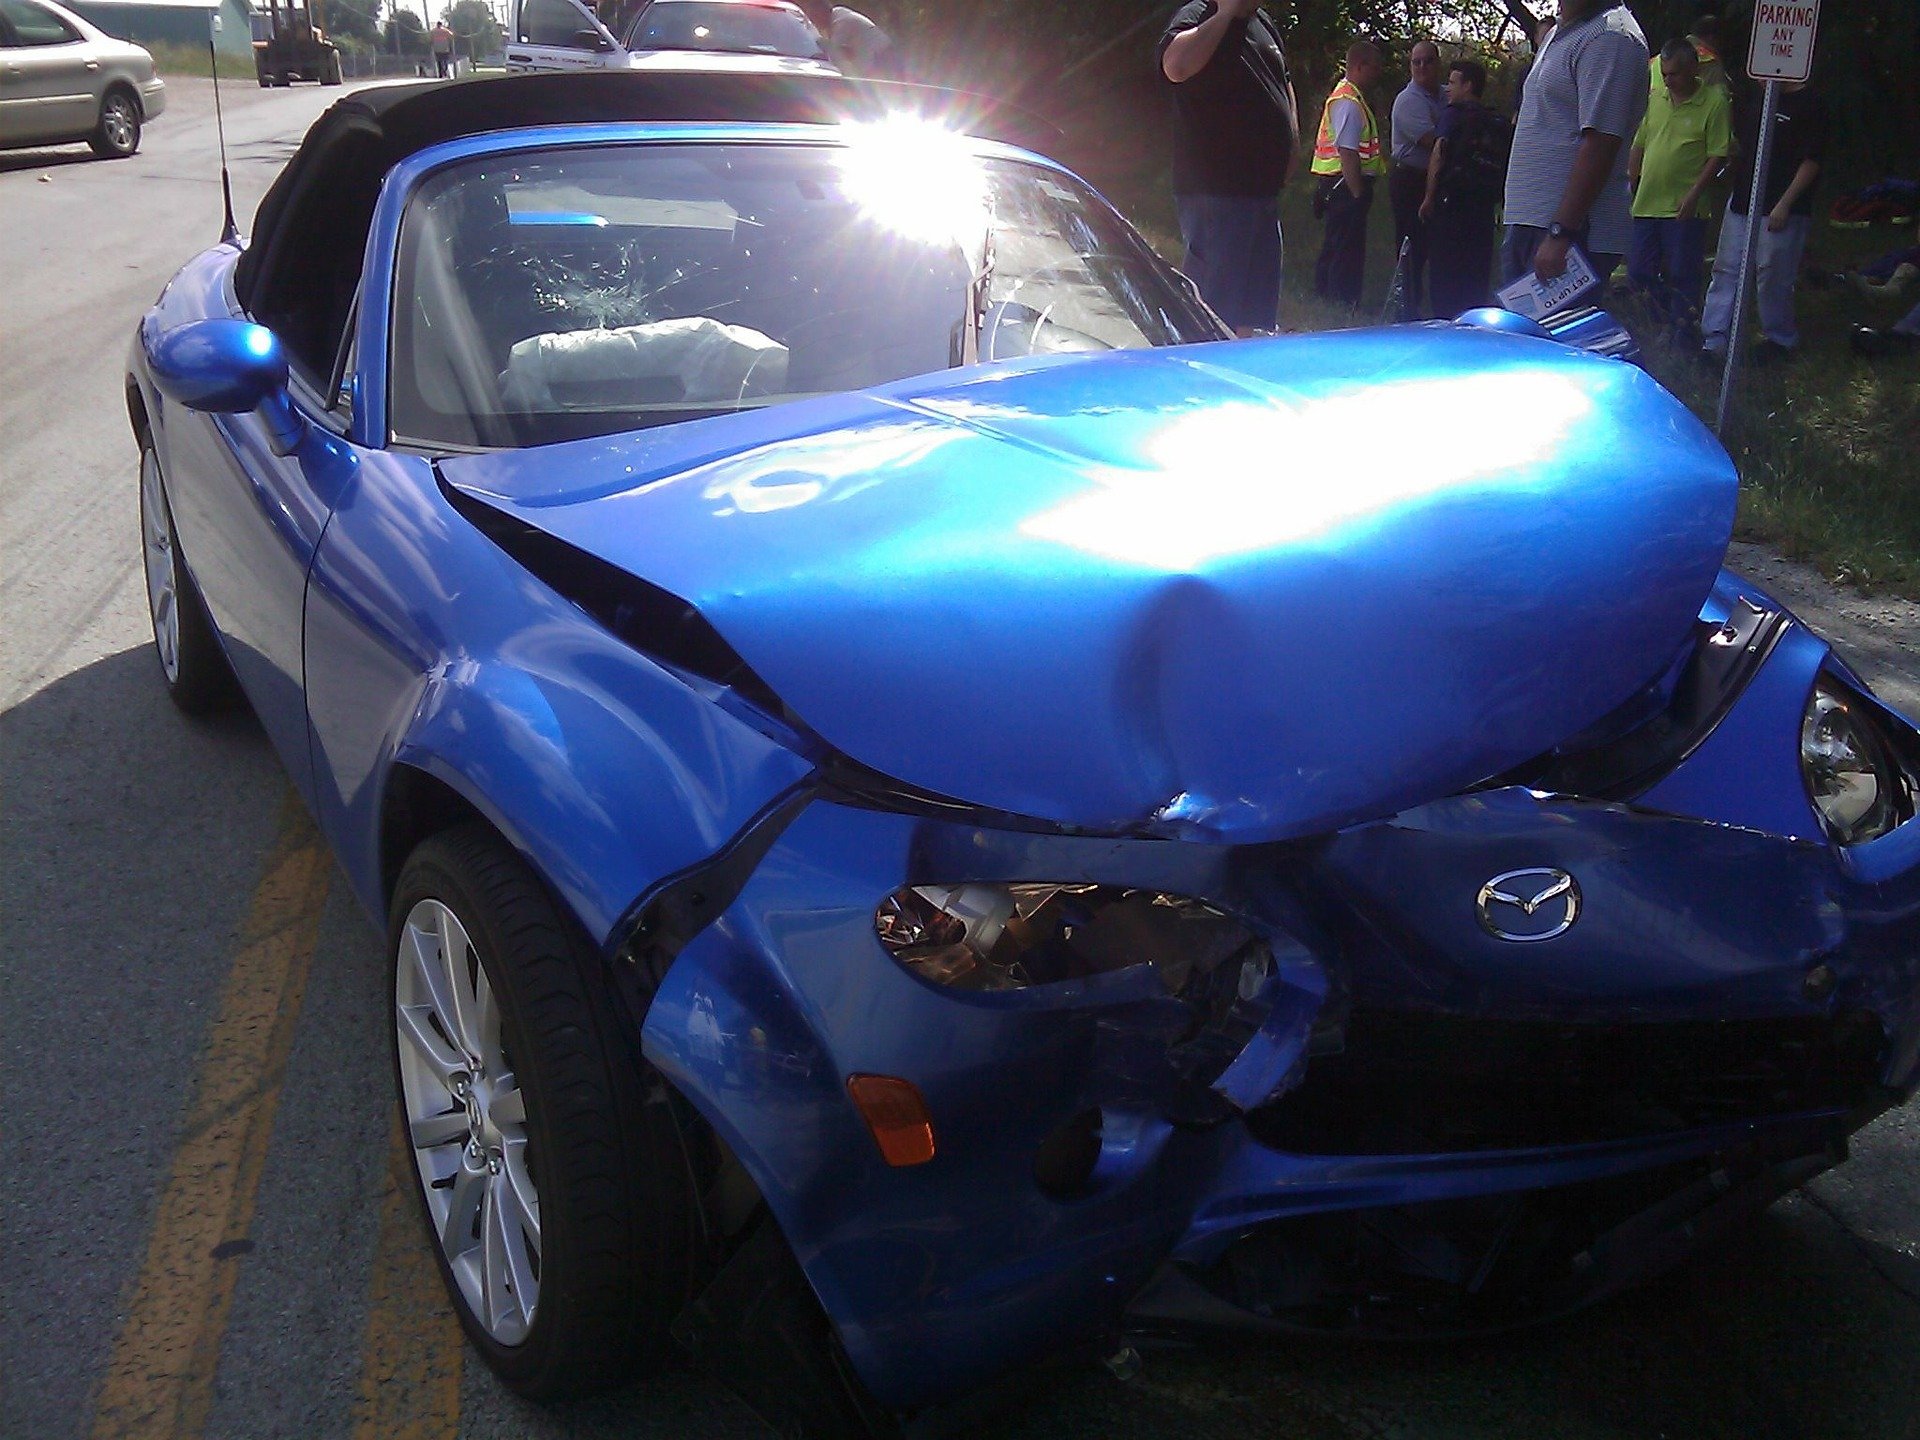 Pictured - A blue smashed vehicle following a car accident | Source: Pixabay